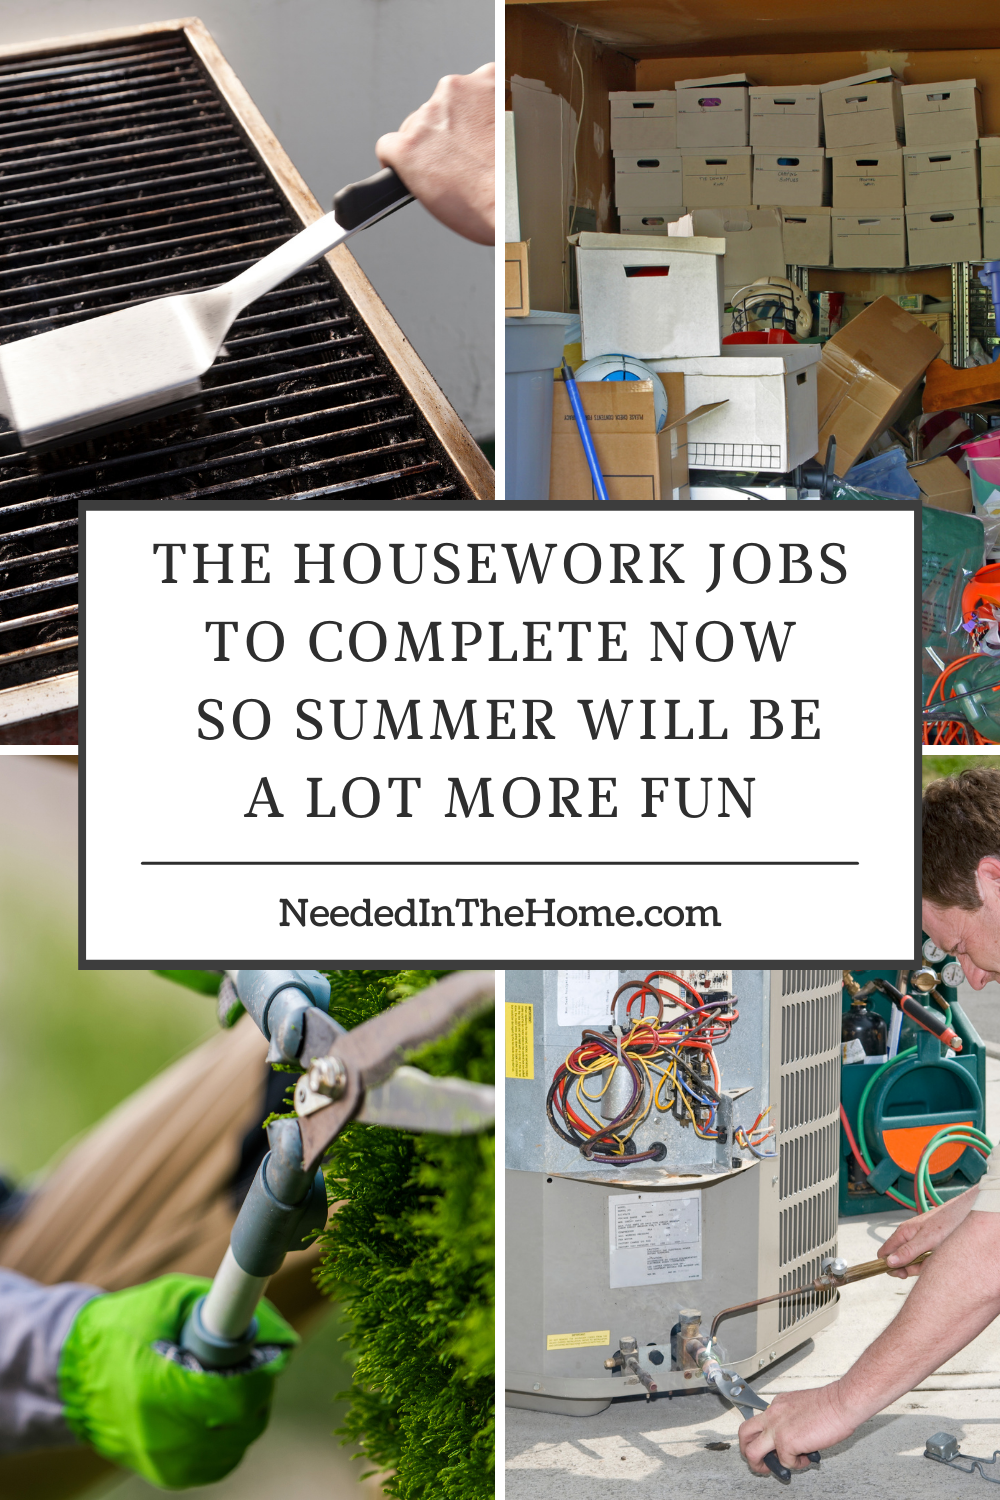 pinterest-pin-description the housework jobs to complete now so summer will be more fun clean grill grate garage trim hedge ac work done neededinthehomee